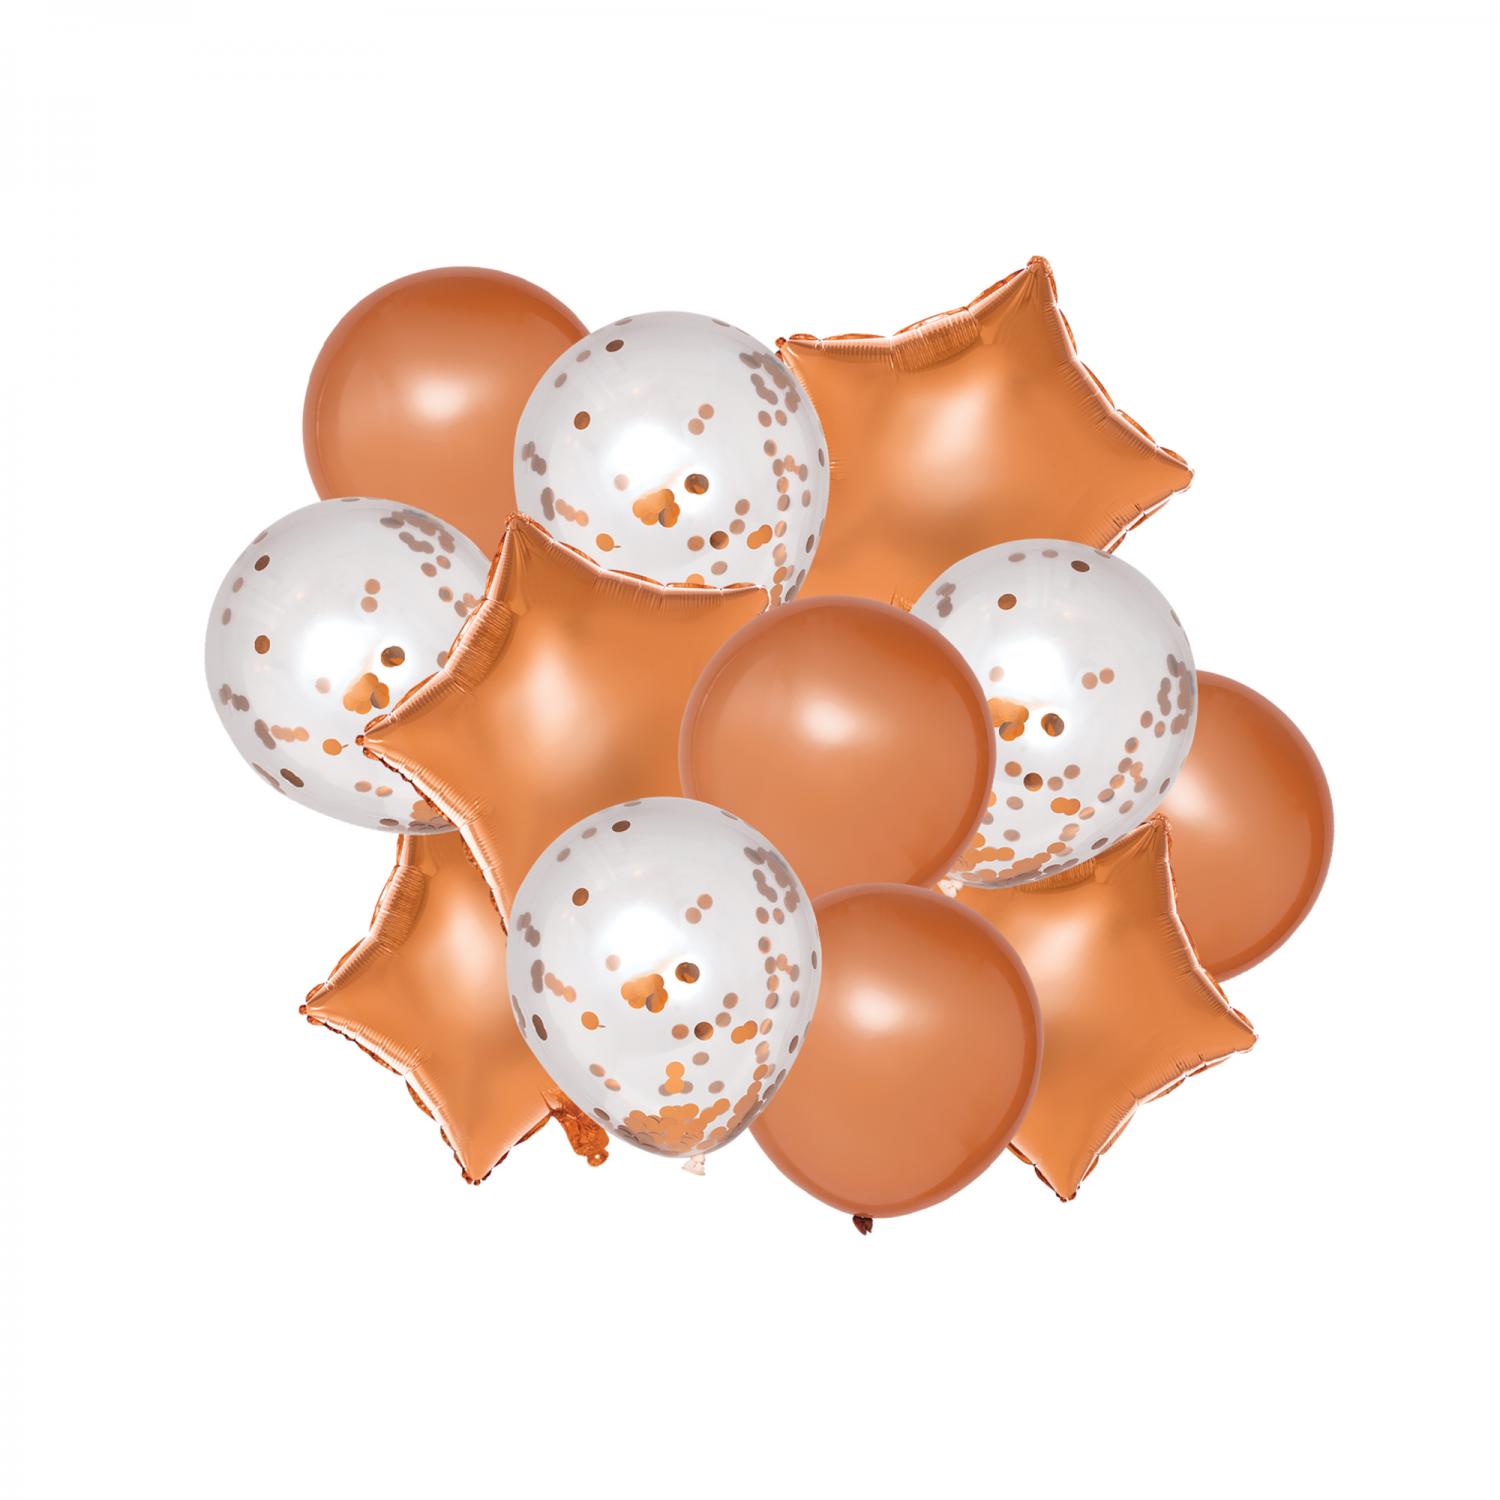 Rose Gold Helium Balloons Bouquet | Party Balloons Delivered